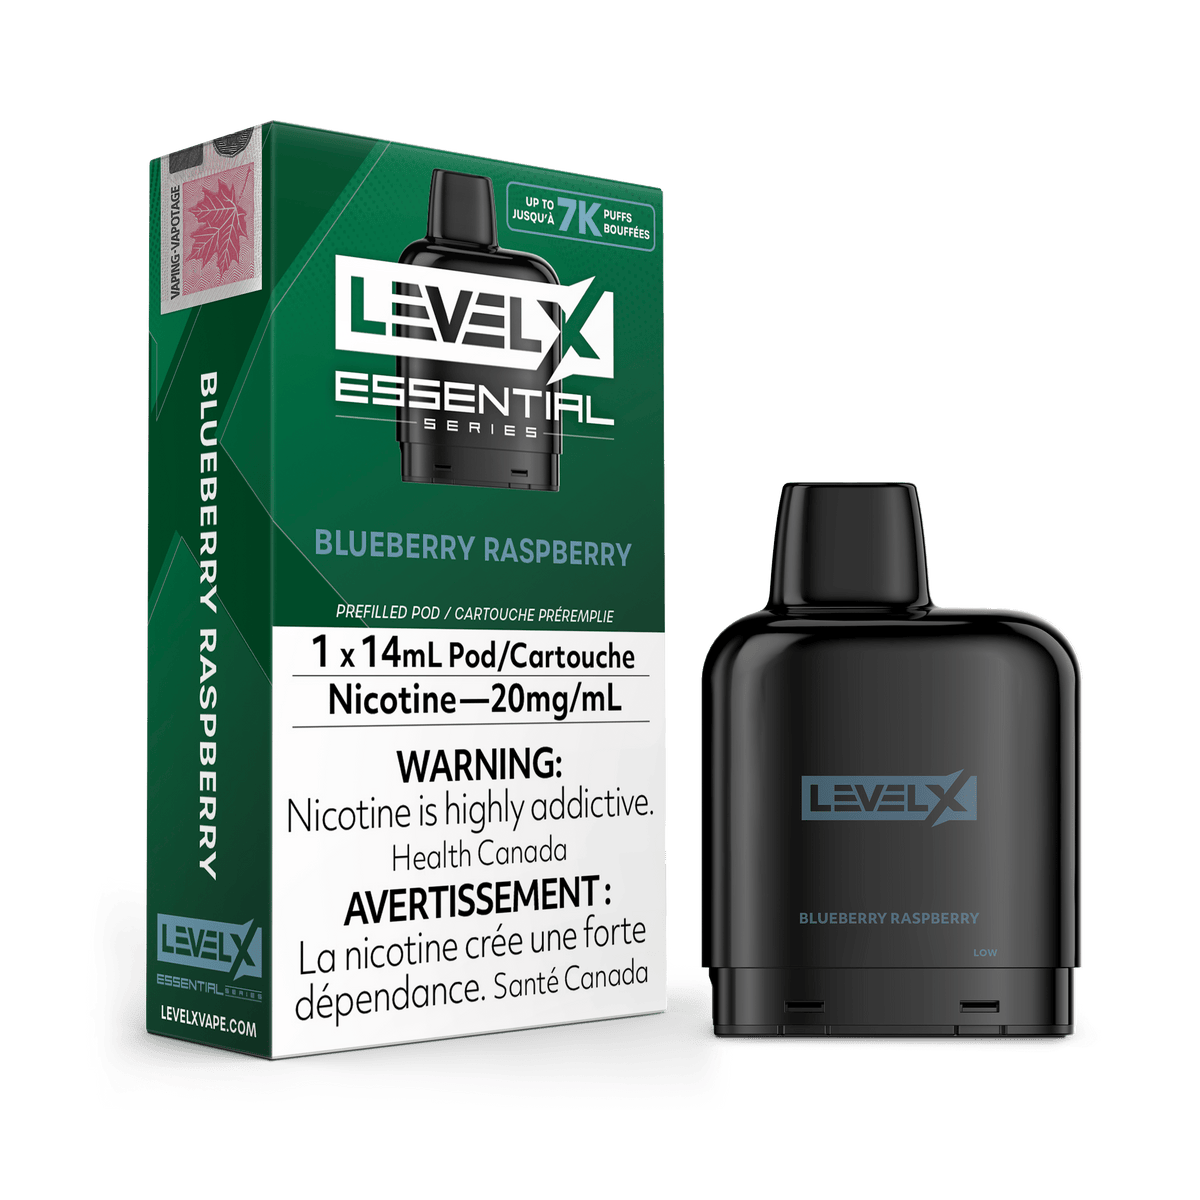 Level X Essential Series Pod - Blueberry Raspberry available on Canada online vape shop